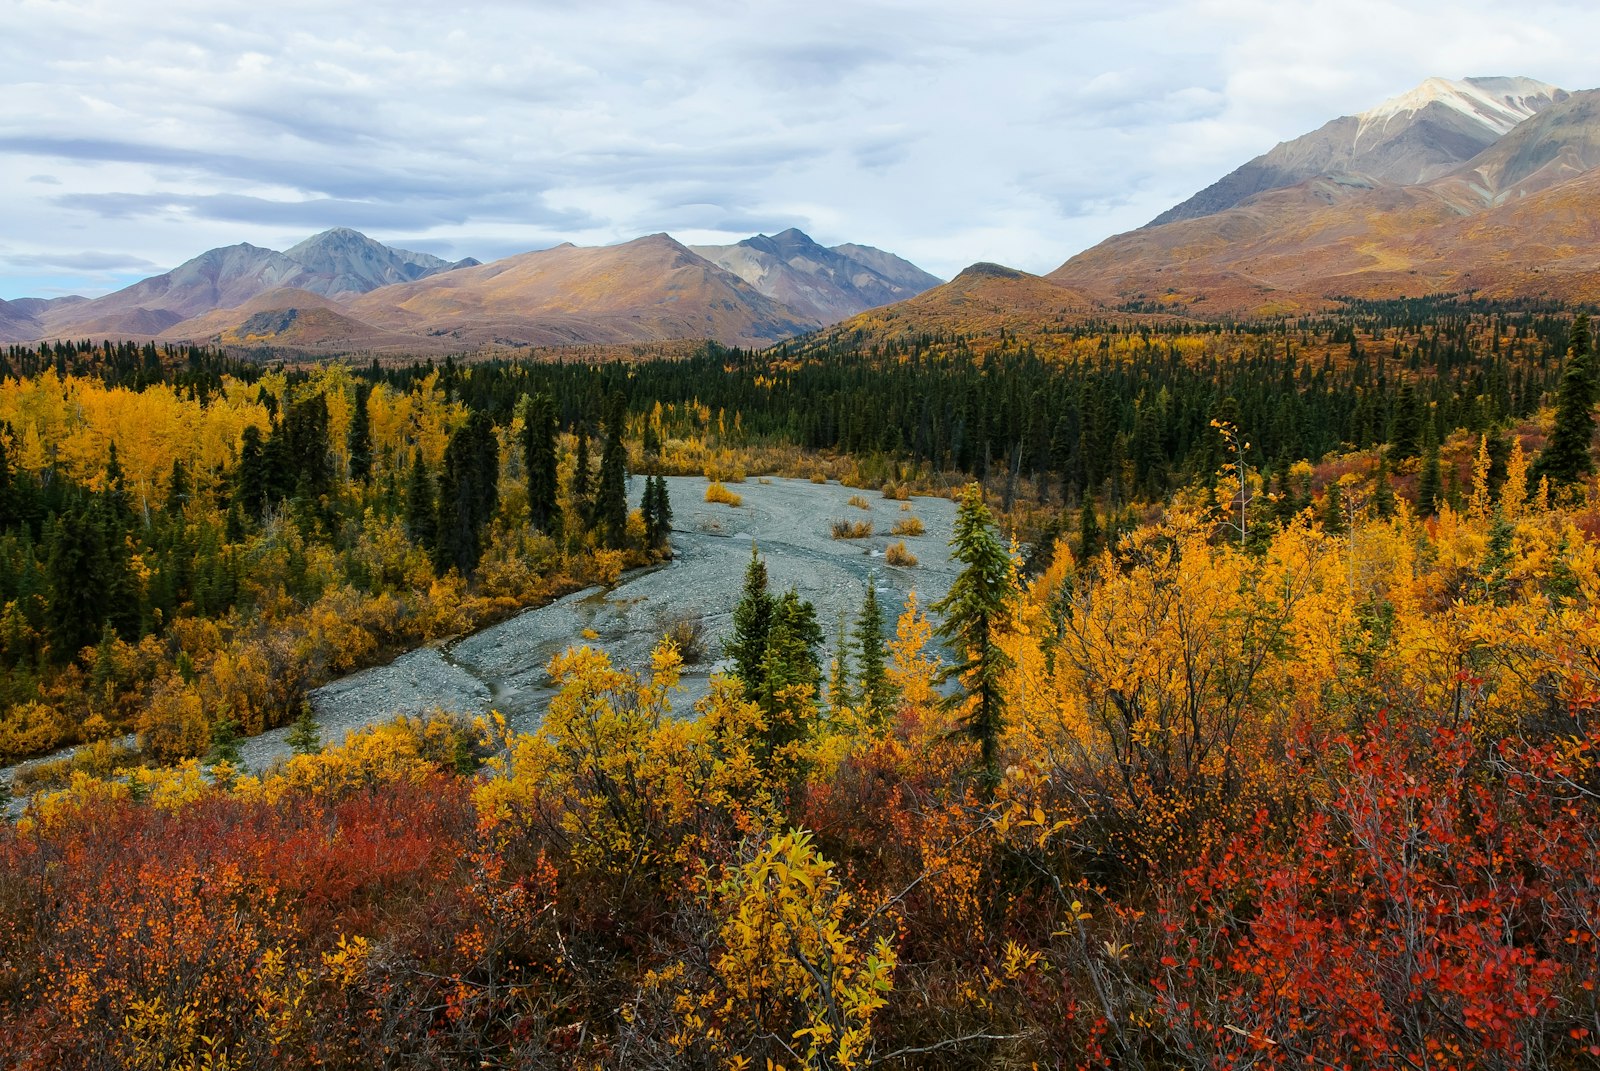 A trail wanders up towards snow-capped mountains. Surrounding the trail, autumn colored leaves cover the landscape